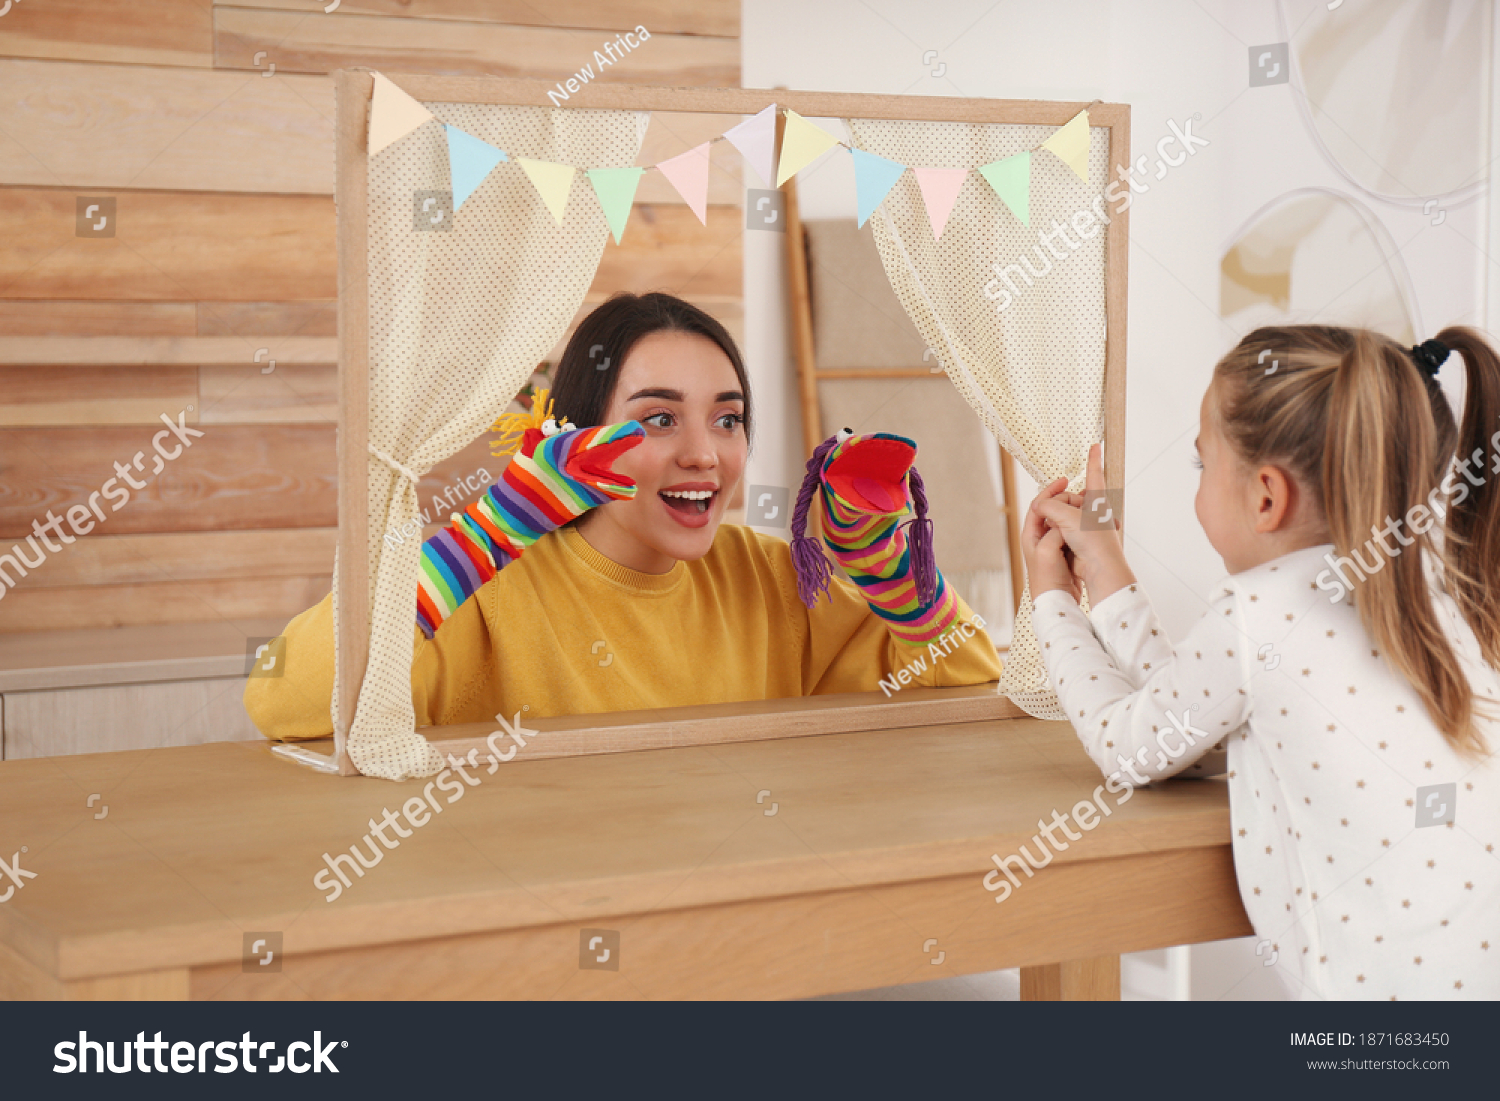 Mother performing puppet show for her daughter at home #1871683450